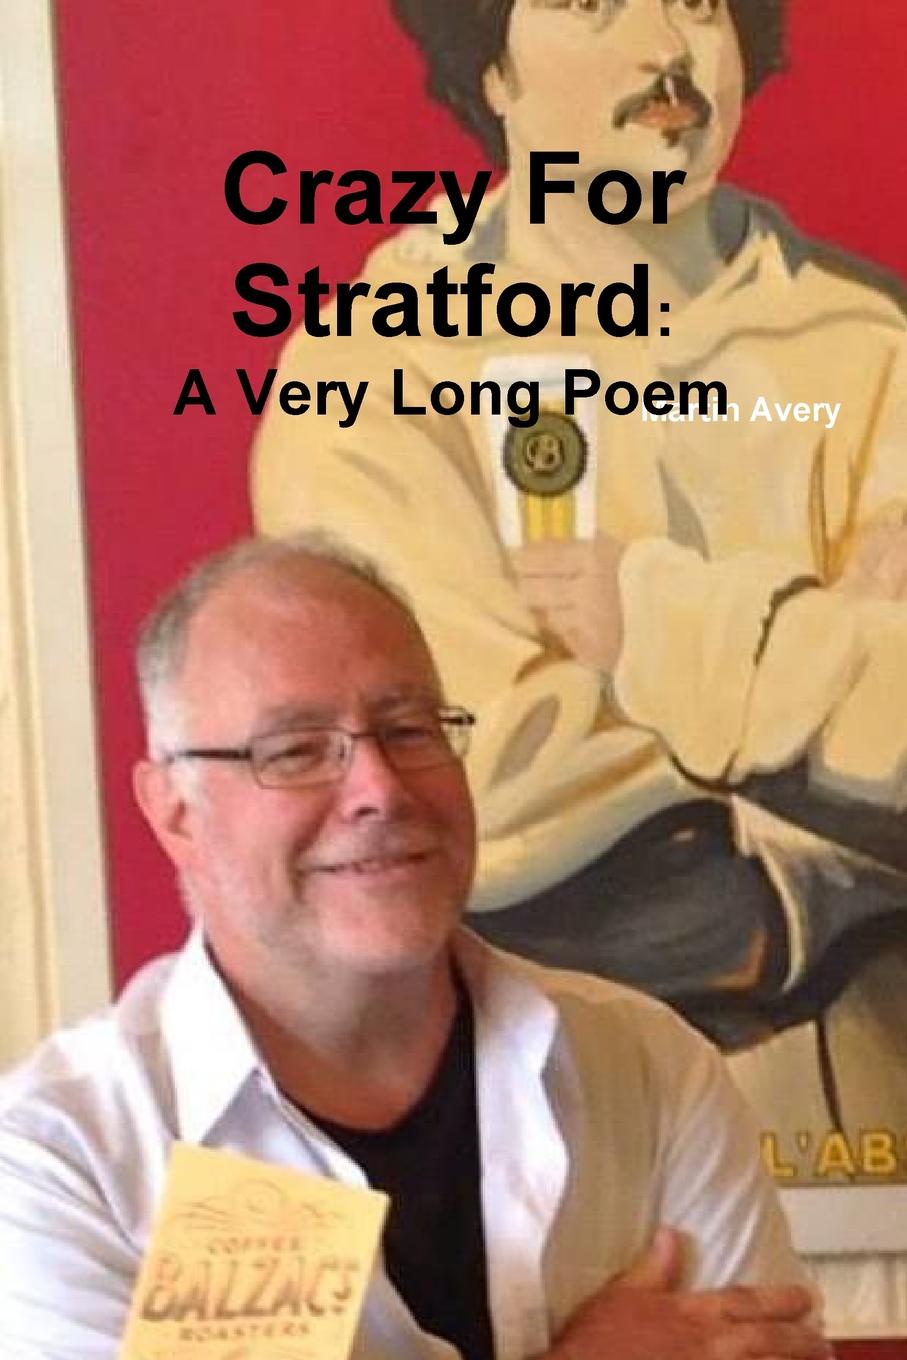 Martin Avery Crazy for Stratford. A Very Long Poem